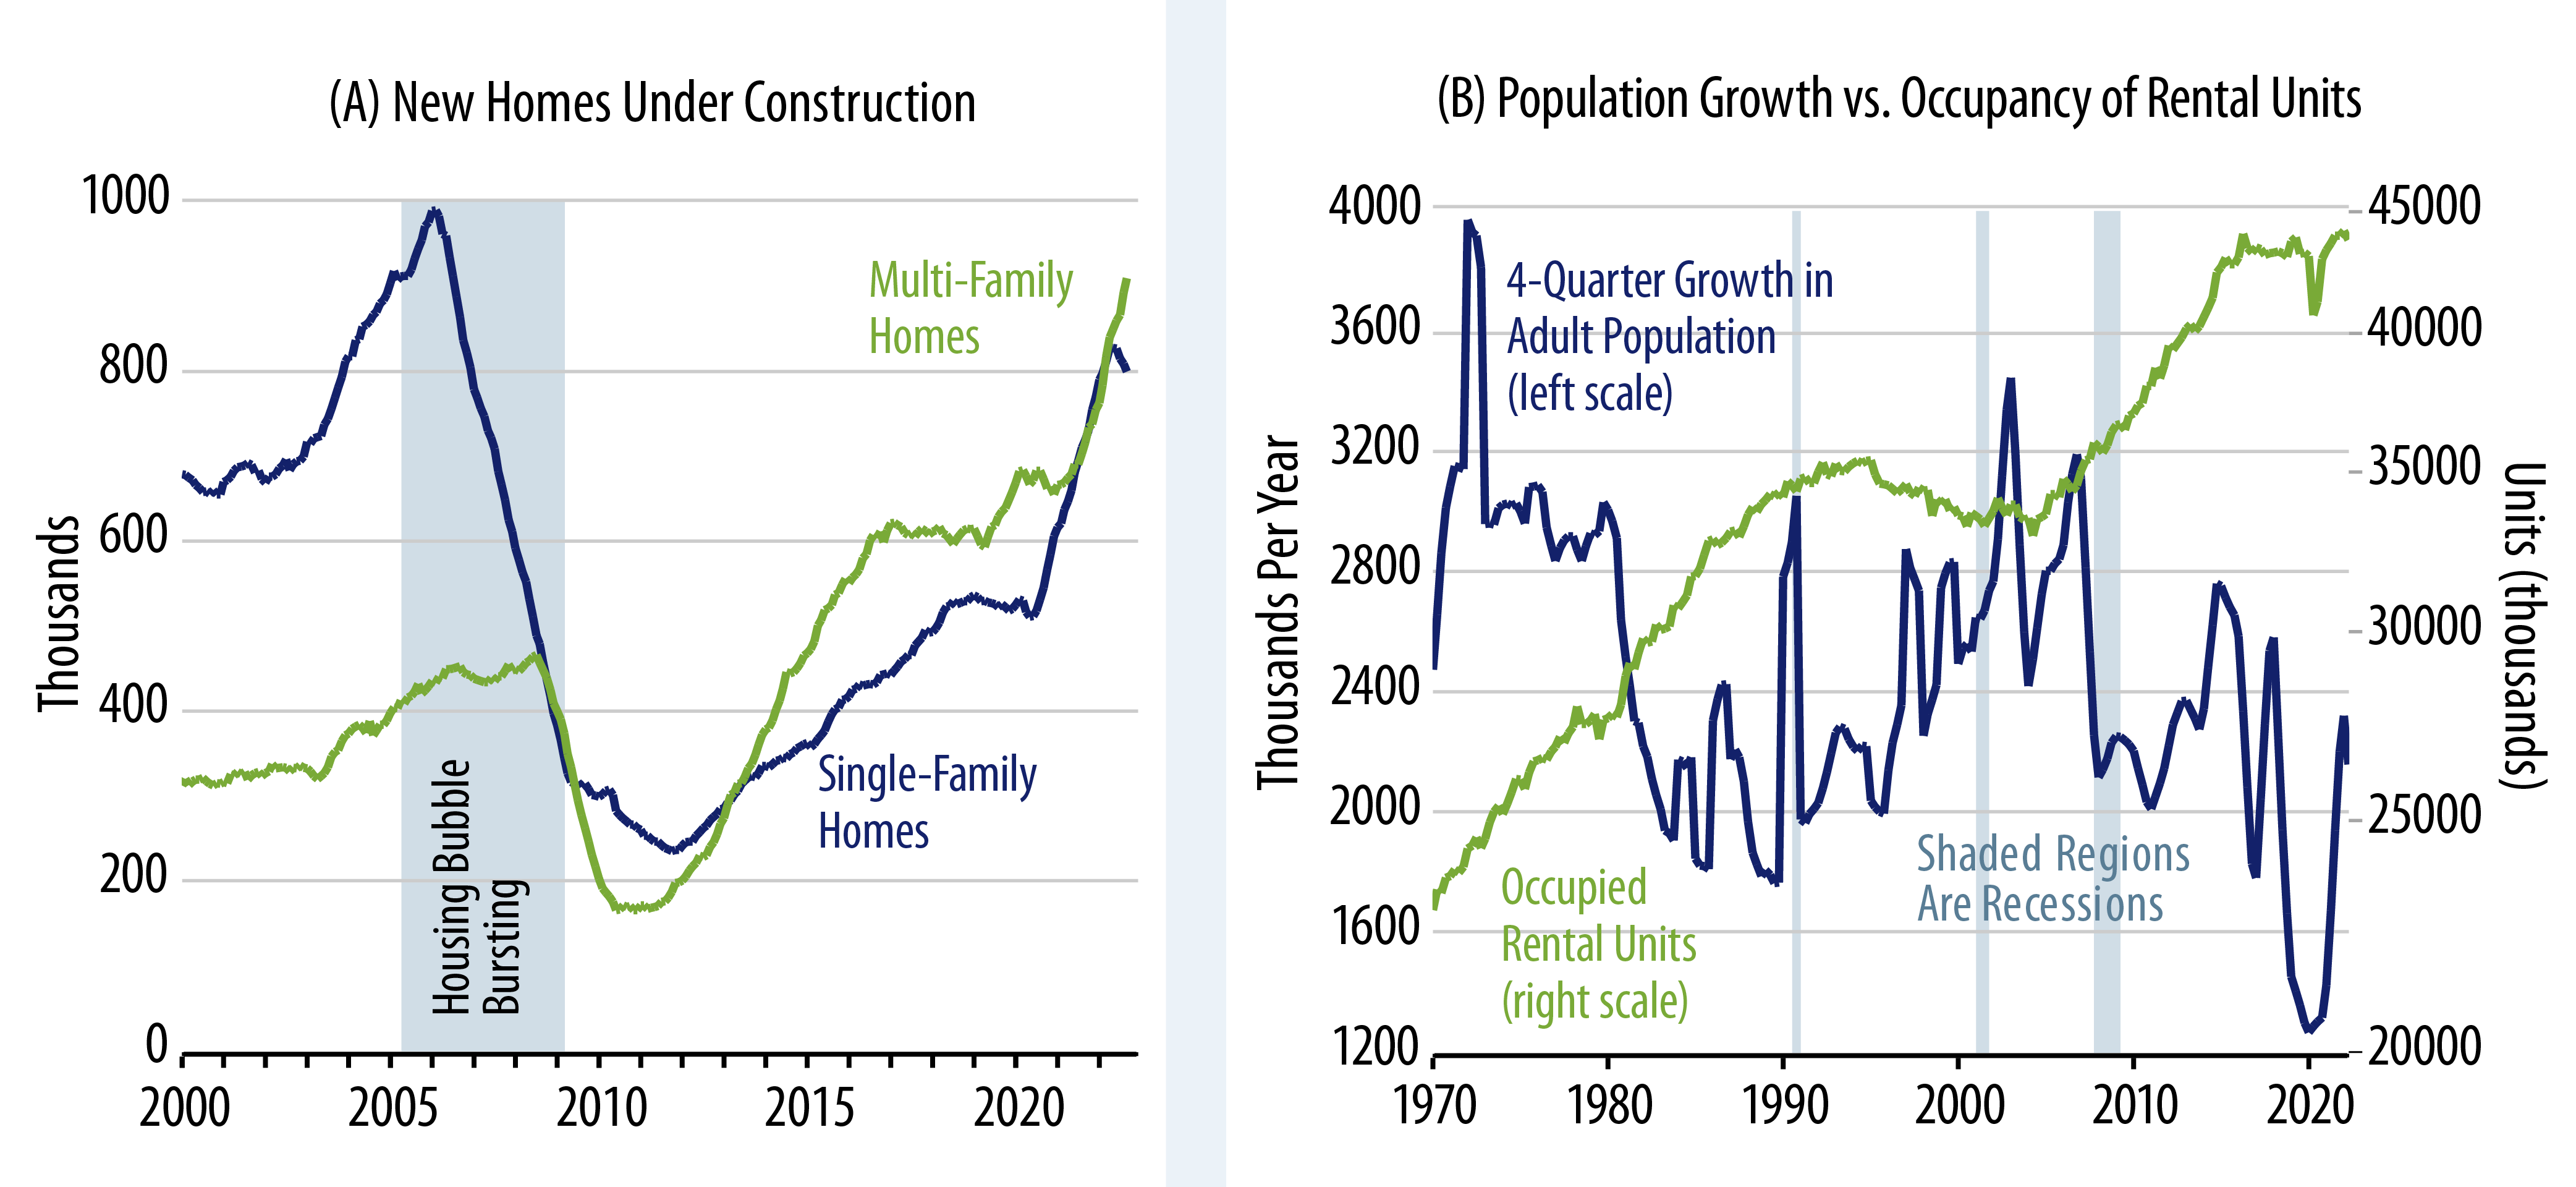 New-Home Construction, Occupancy in Rentals